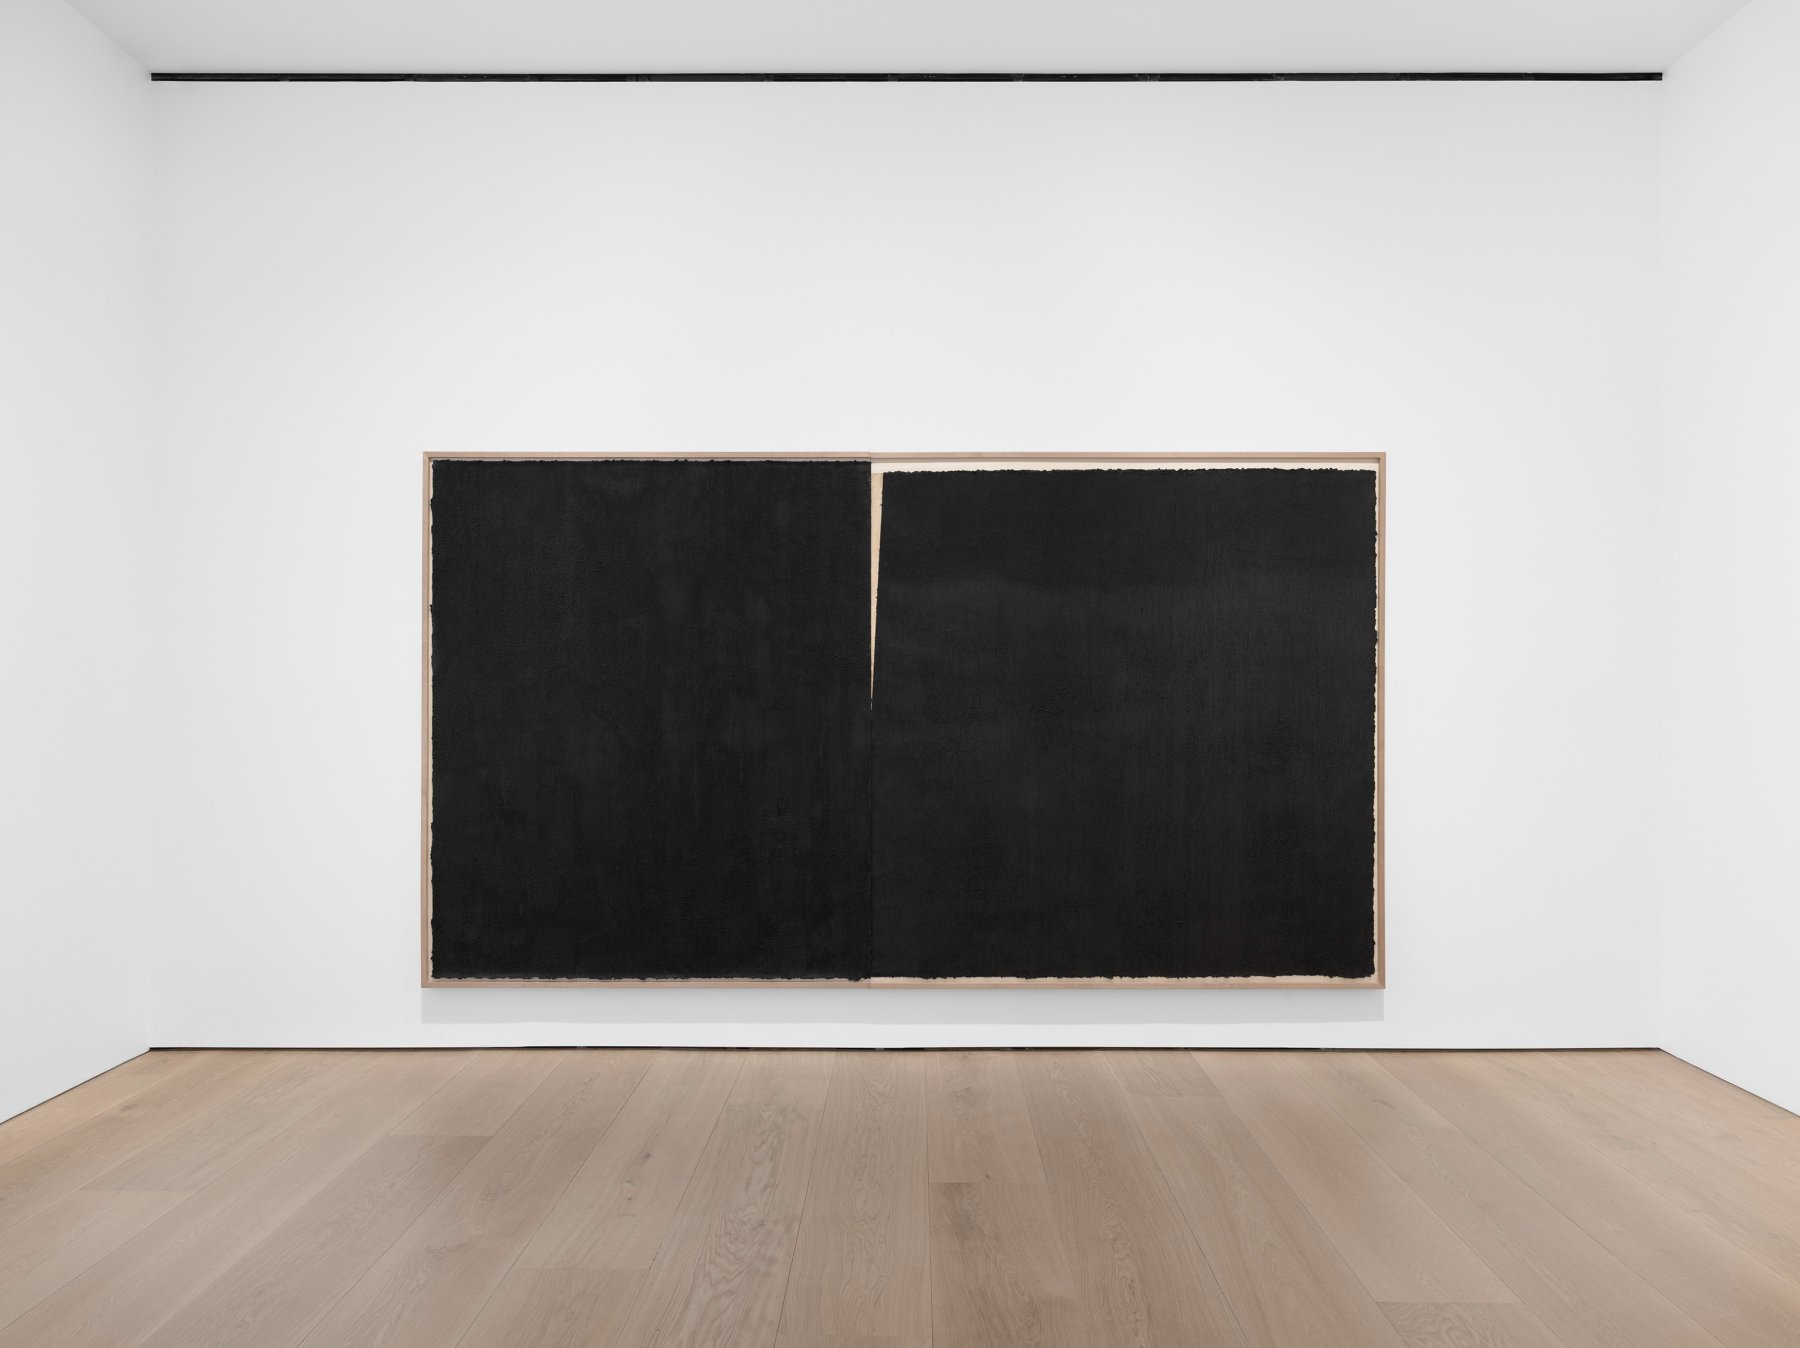 Image from our show of the day, Richard Serra: Six Large Drawings @ David Zwirner